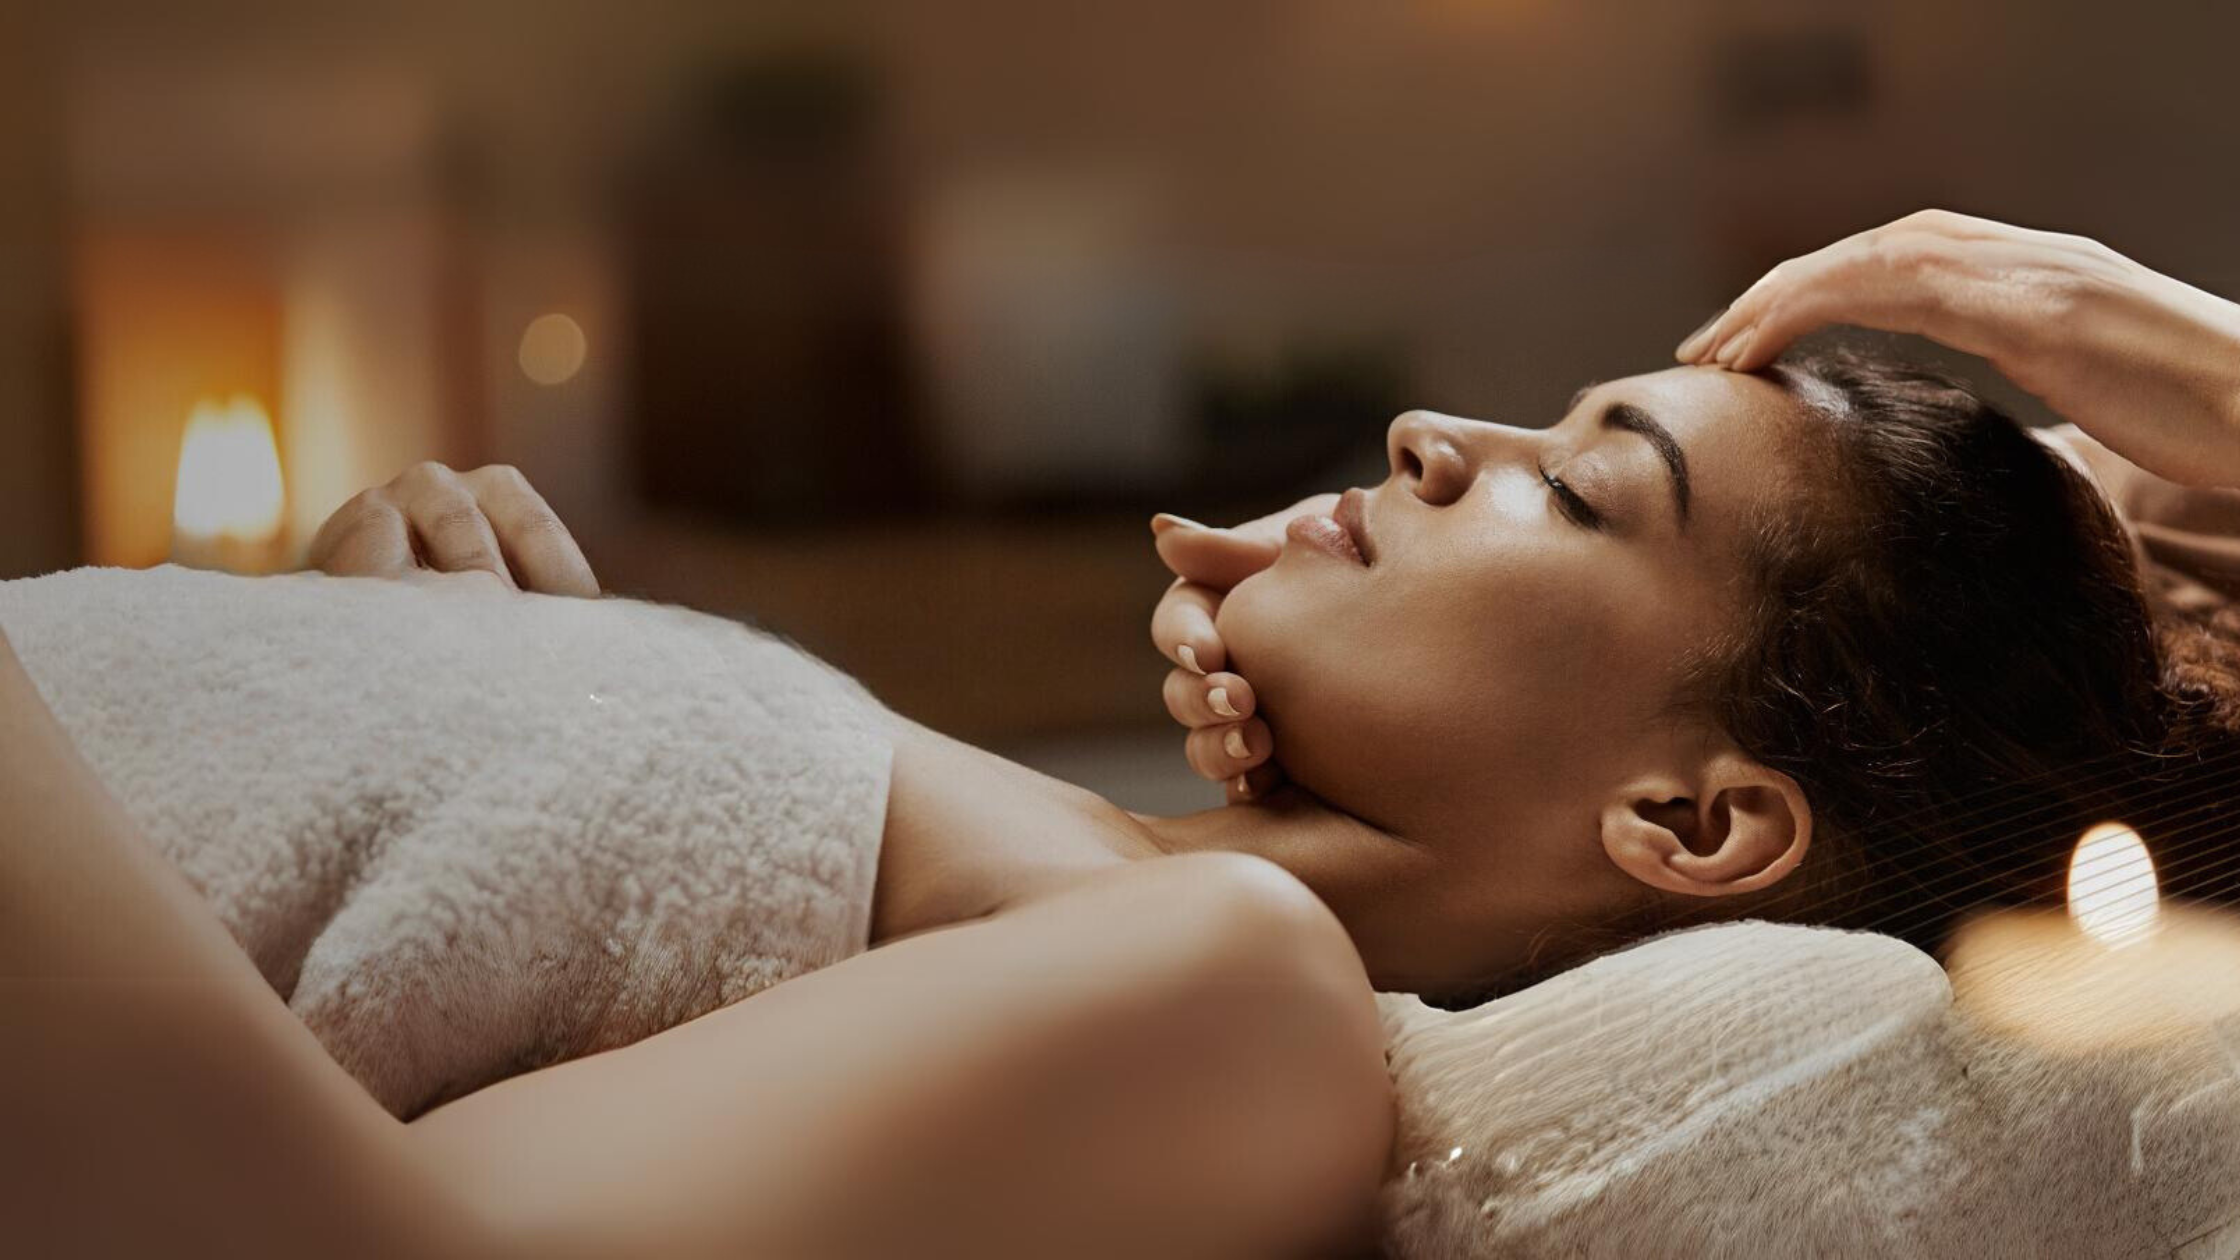 Relaxing spa scene with a woman receiving a facial massage, enveloped in a serene, warmly lit ambiance